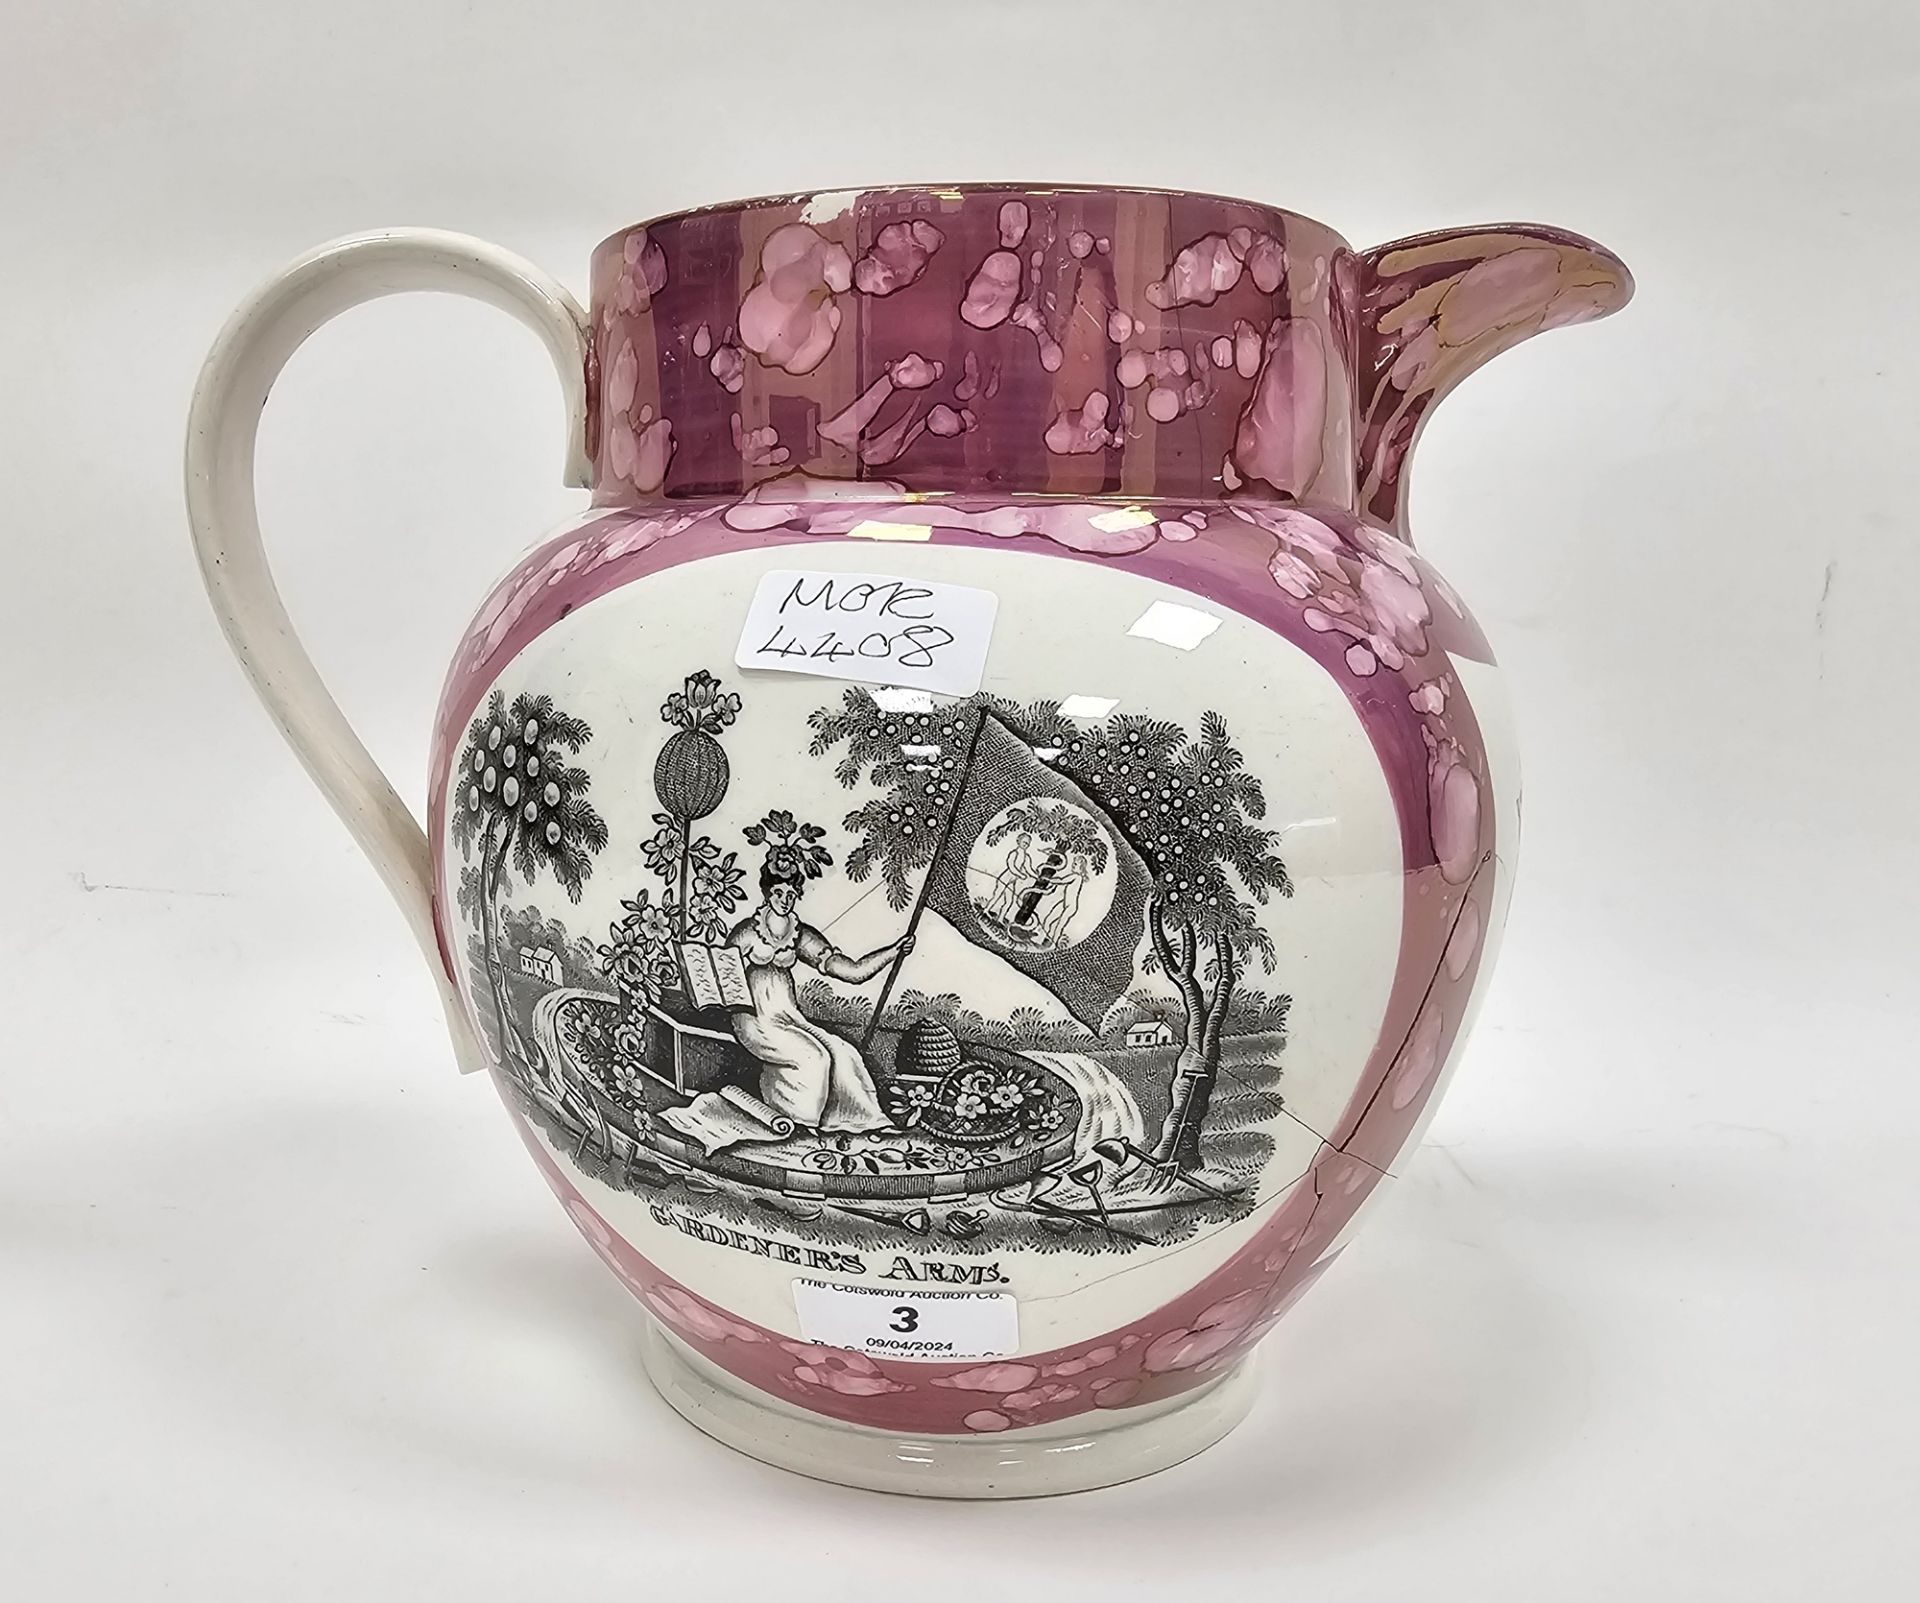 Sunderland pearlware lustre jug, early 19th century, printed with a ship titled 'Northumberland - Image 3 of 4